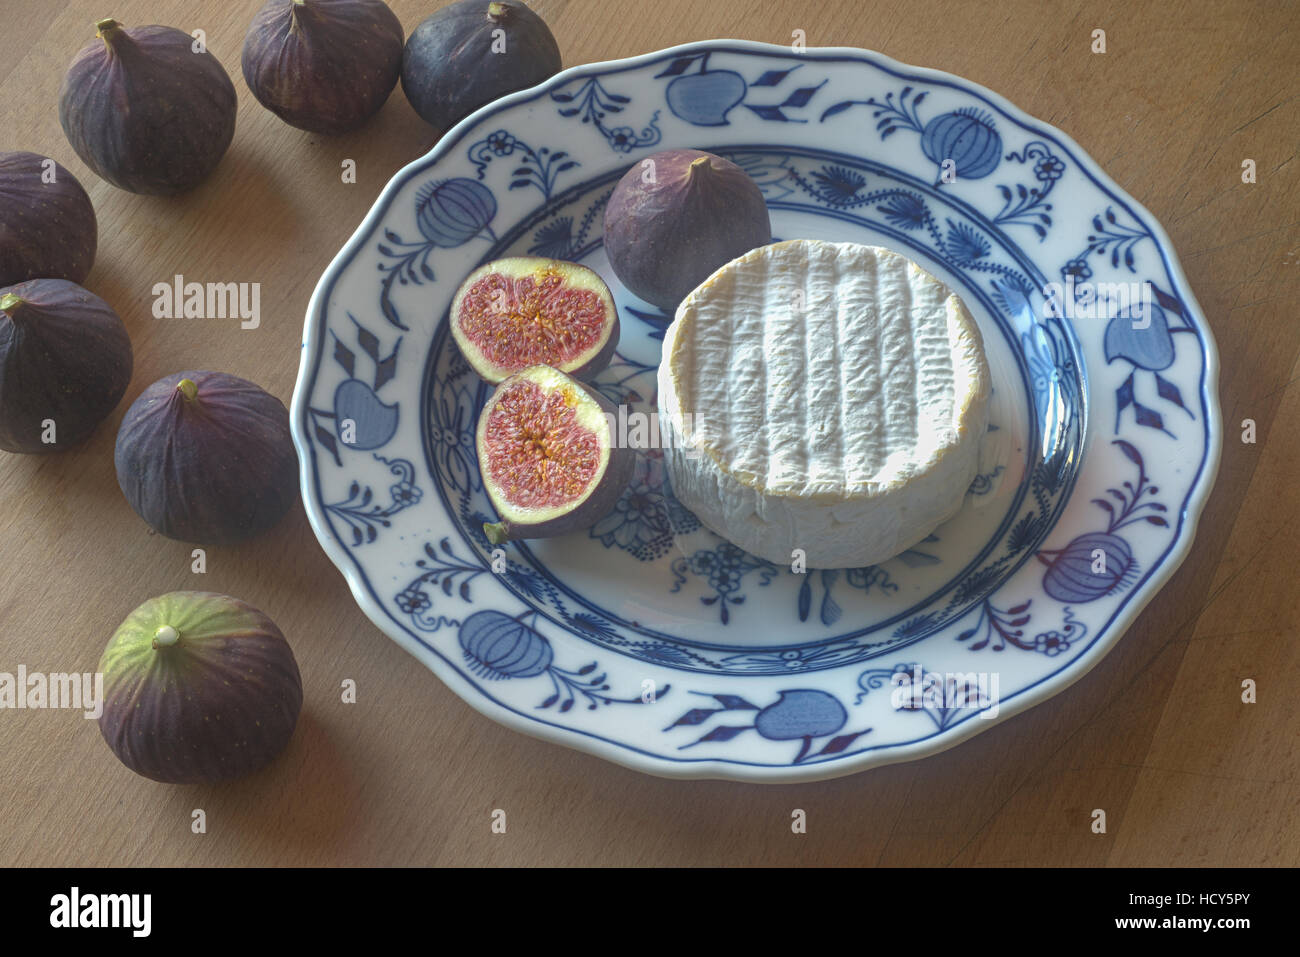 french camembert and fresh figs on a plate Stock Photo